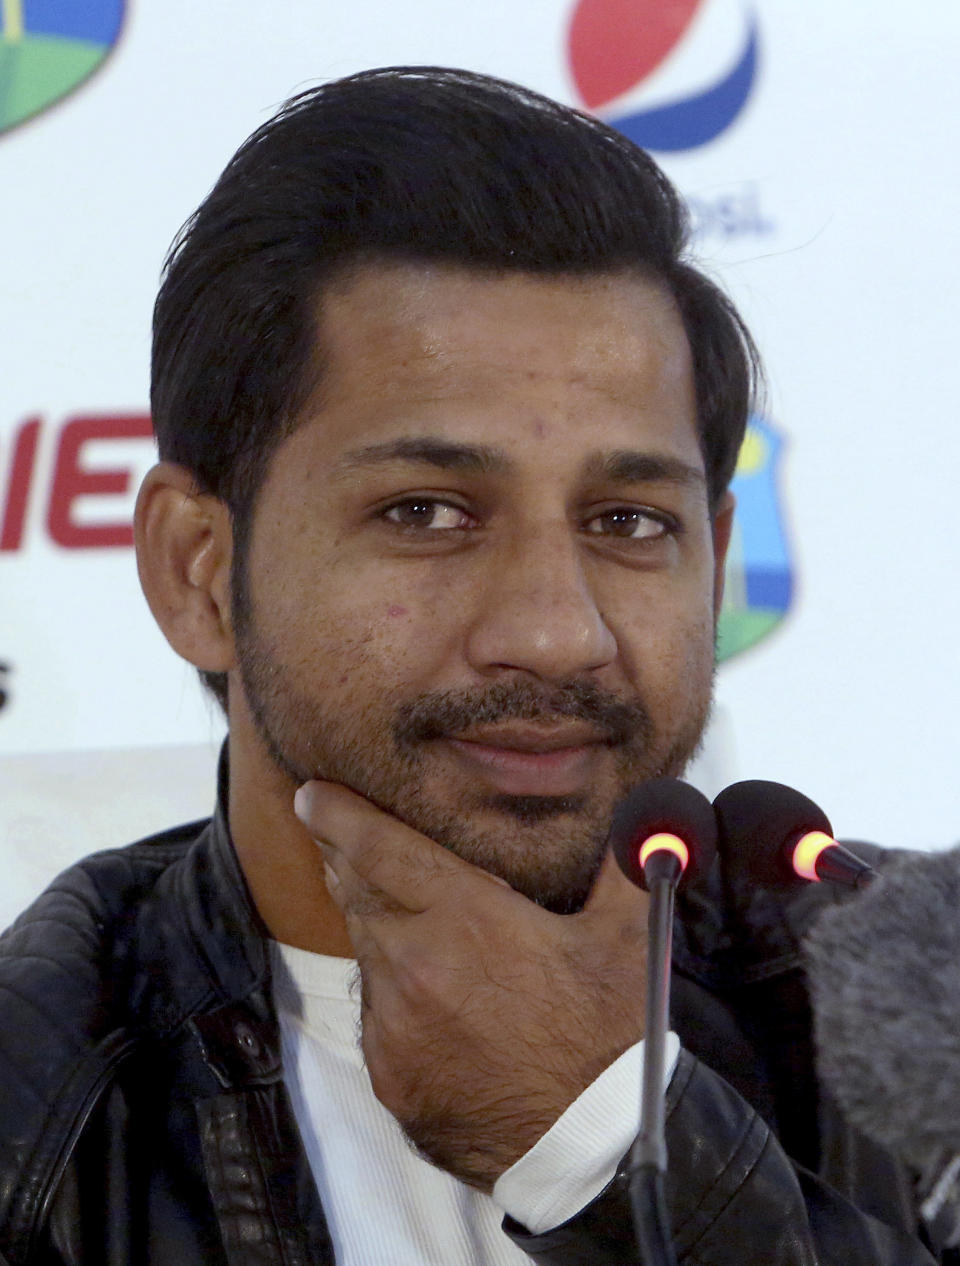 Pakistan's banned captain Sarfraz Ahmed listens to a reporter during a press conference in Karachi, Pakistan, Sunday, Feb. 3, 2019. Ahmed hopes his four-match suspension will not deny him from leading the country in the World Cup in England later this year. (AP Photo/Fareed Khan)